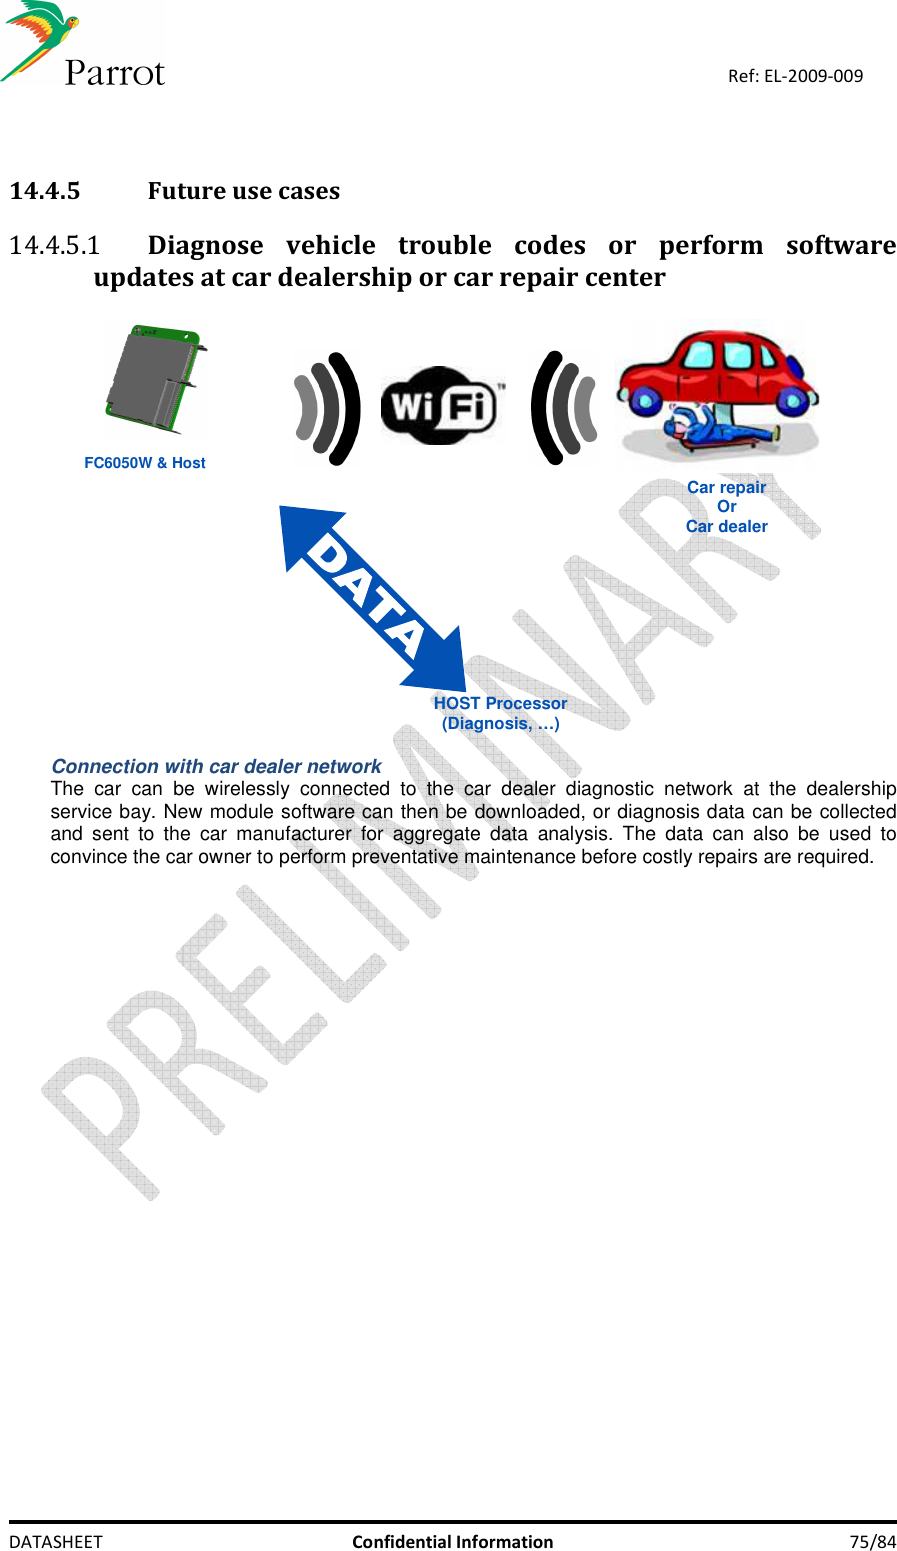    DATASHEET  Confidential Information  75/84 Ref: EL-2009-009   14.4.5 Future use cases 14.4.5.1 Diagnose  vehicle  trouble  codes  or  perform  software updates at car dealership or car repair center  Car repair Or Car dealer HOST Processor (Diagnosis, …) FC6050W &amp; Host   Connection with car dealer network The  car  can  be  wirelessly  connected  to  the  car  dealer  diagnostic  network  at  the  dealership service bay. New module software can then be downloaded, or diagnosis data can be collected and  sent  to  the  car  manufacturer  for  aggregate  data  analysis.  The  data  can  also  be  used  to convince the car owner to perform preventative maintenance before costly repairs are required. 